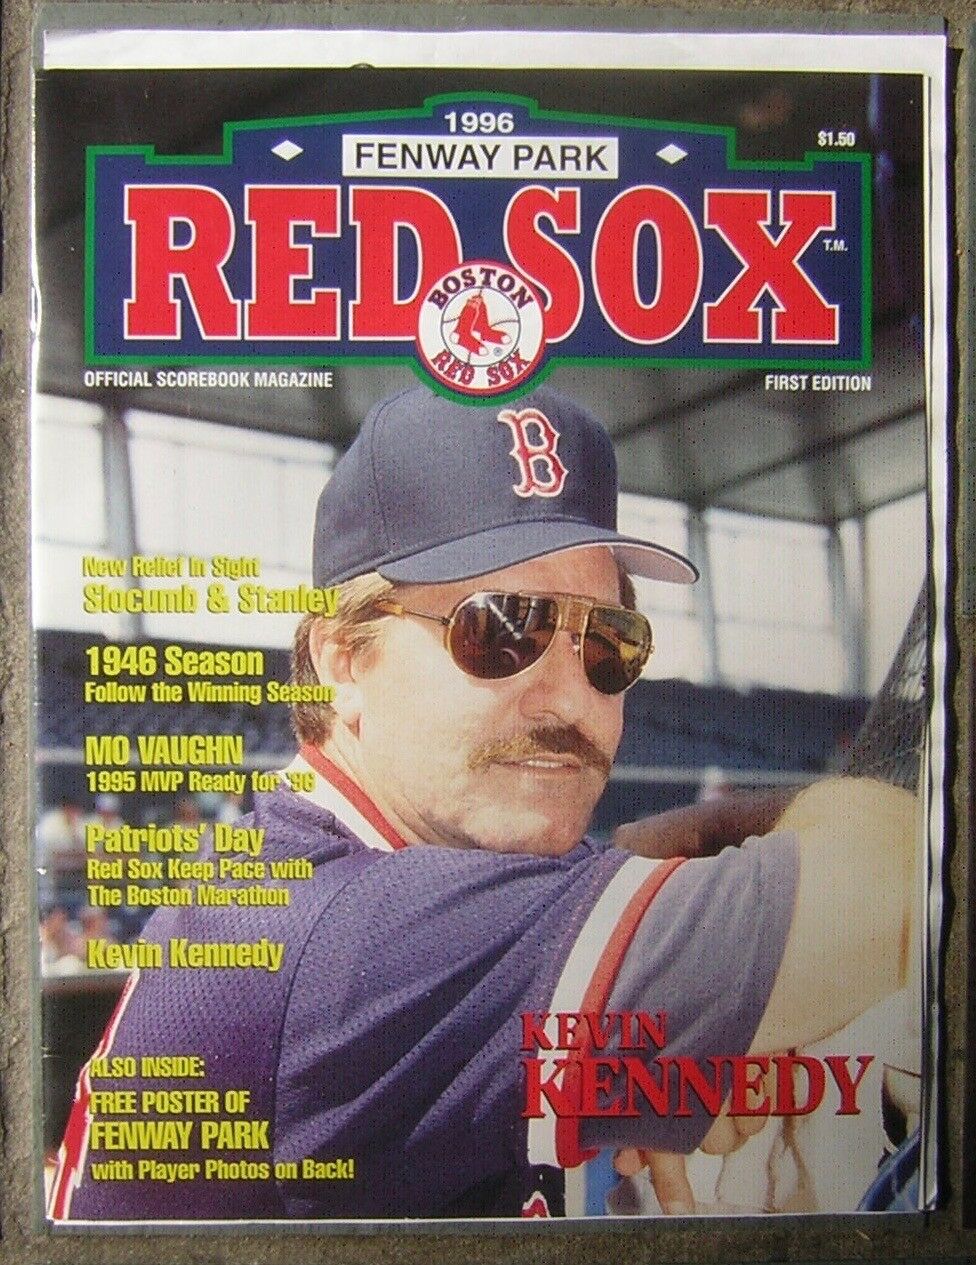 1996 Boston Red Sox Official Program - Opening Day at Fenway Park